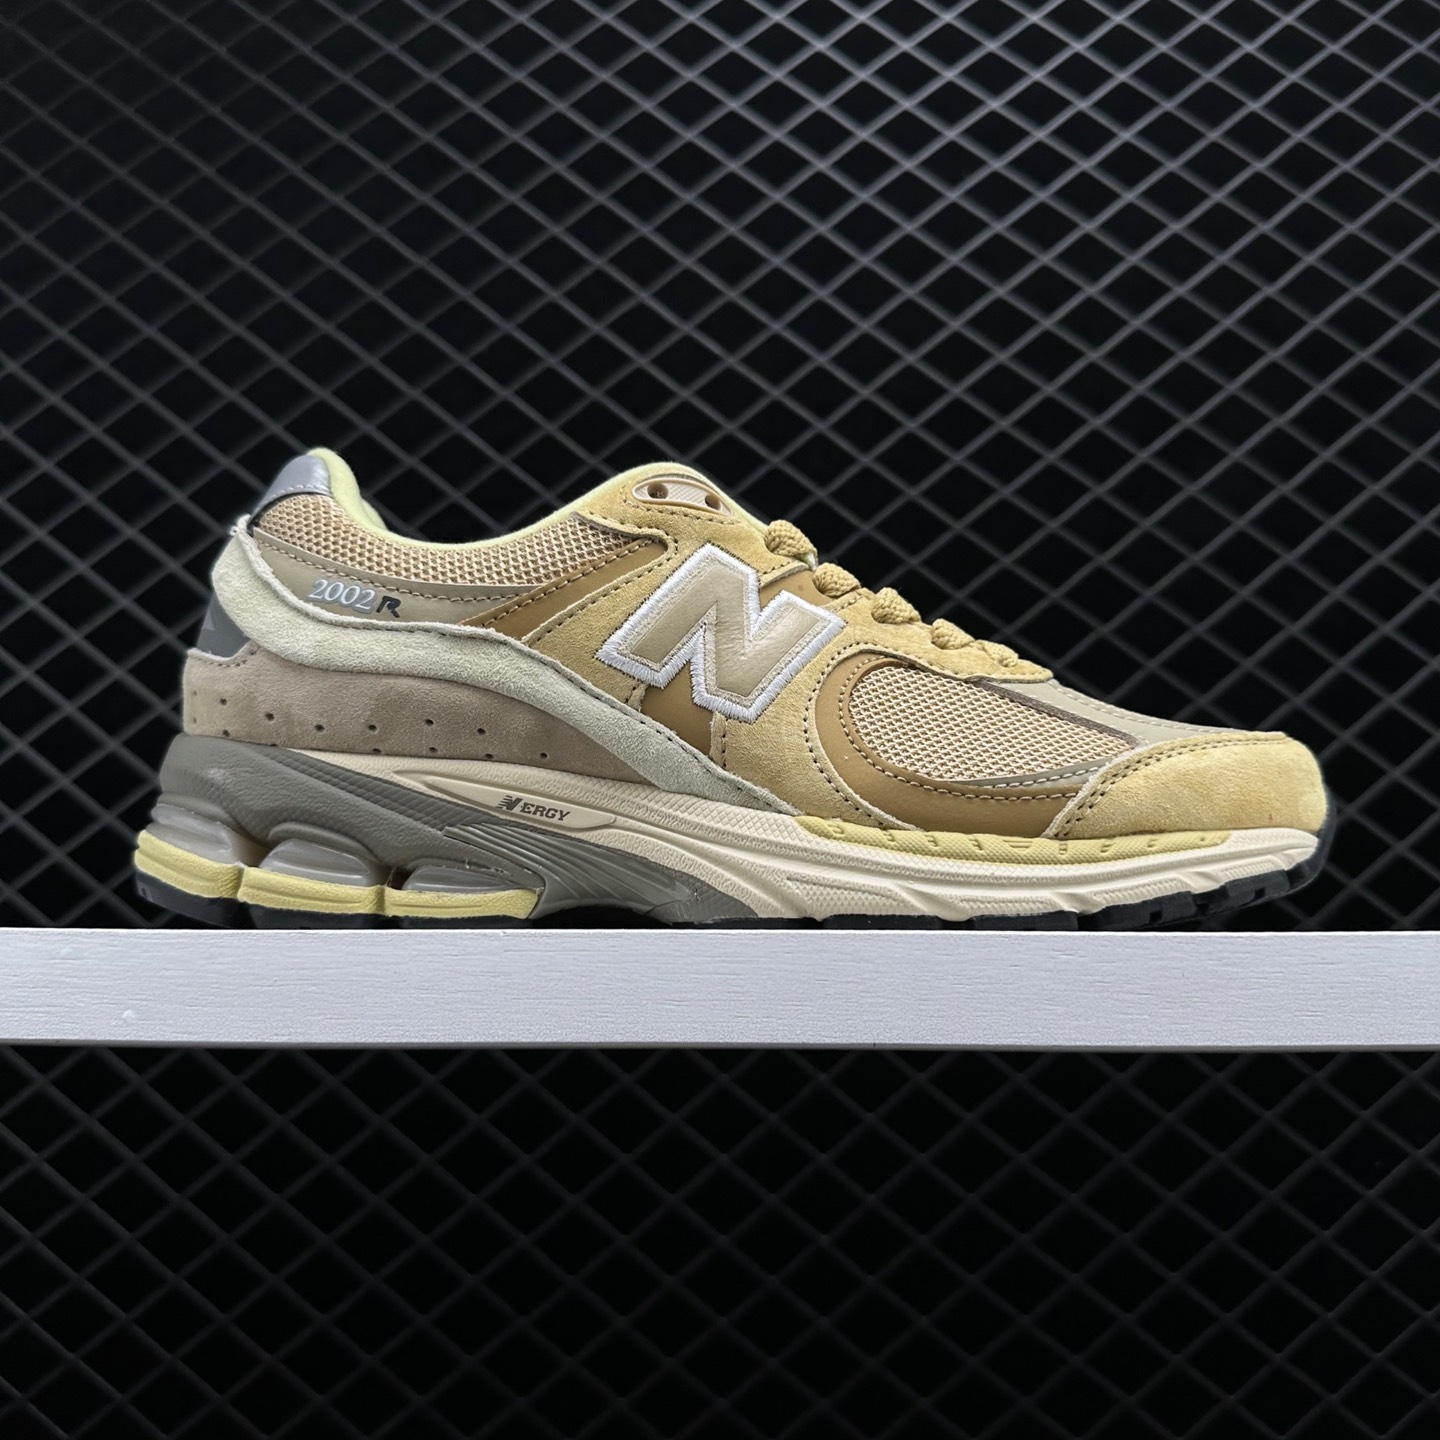 New Balance 2002R AURALEE Yellow Beige - Stylish and Comfortable Sneakers